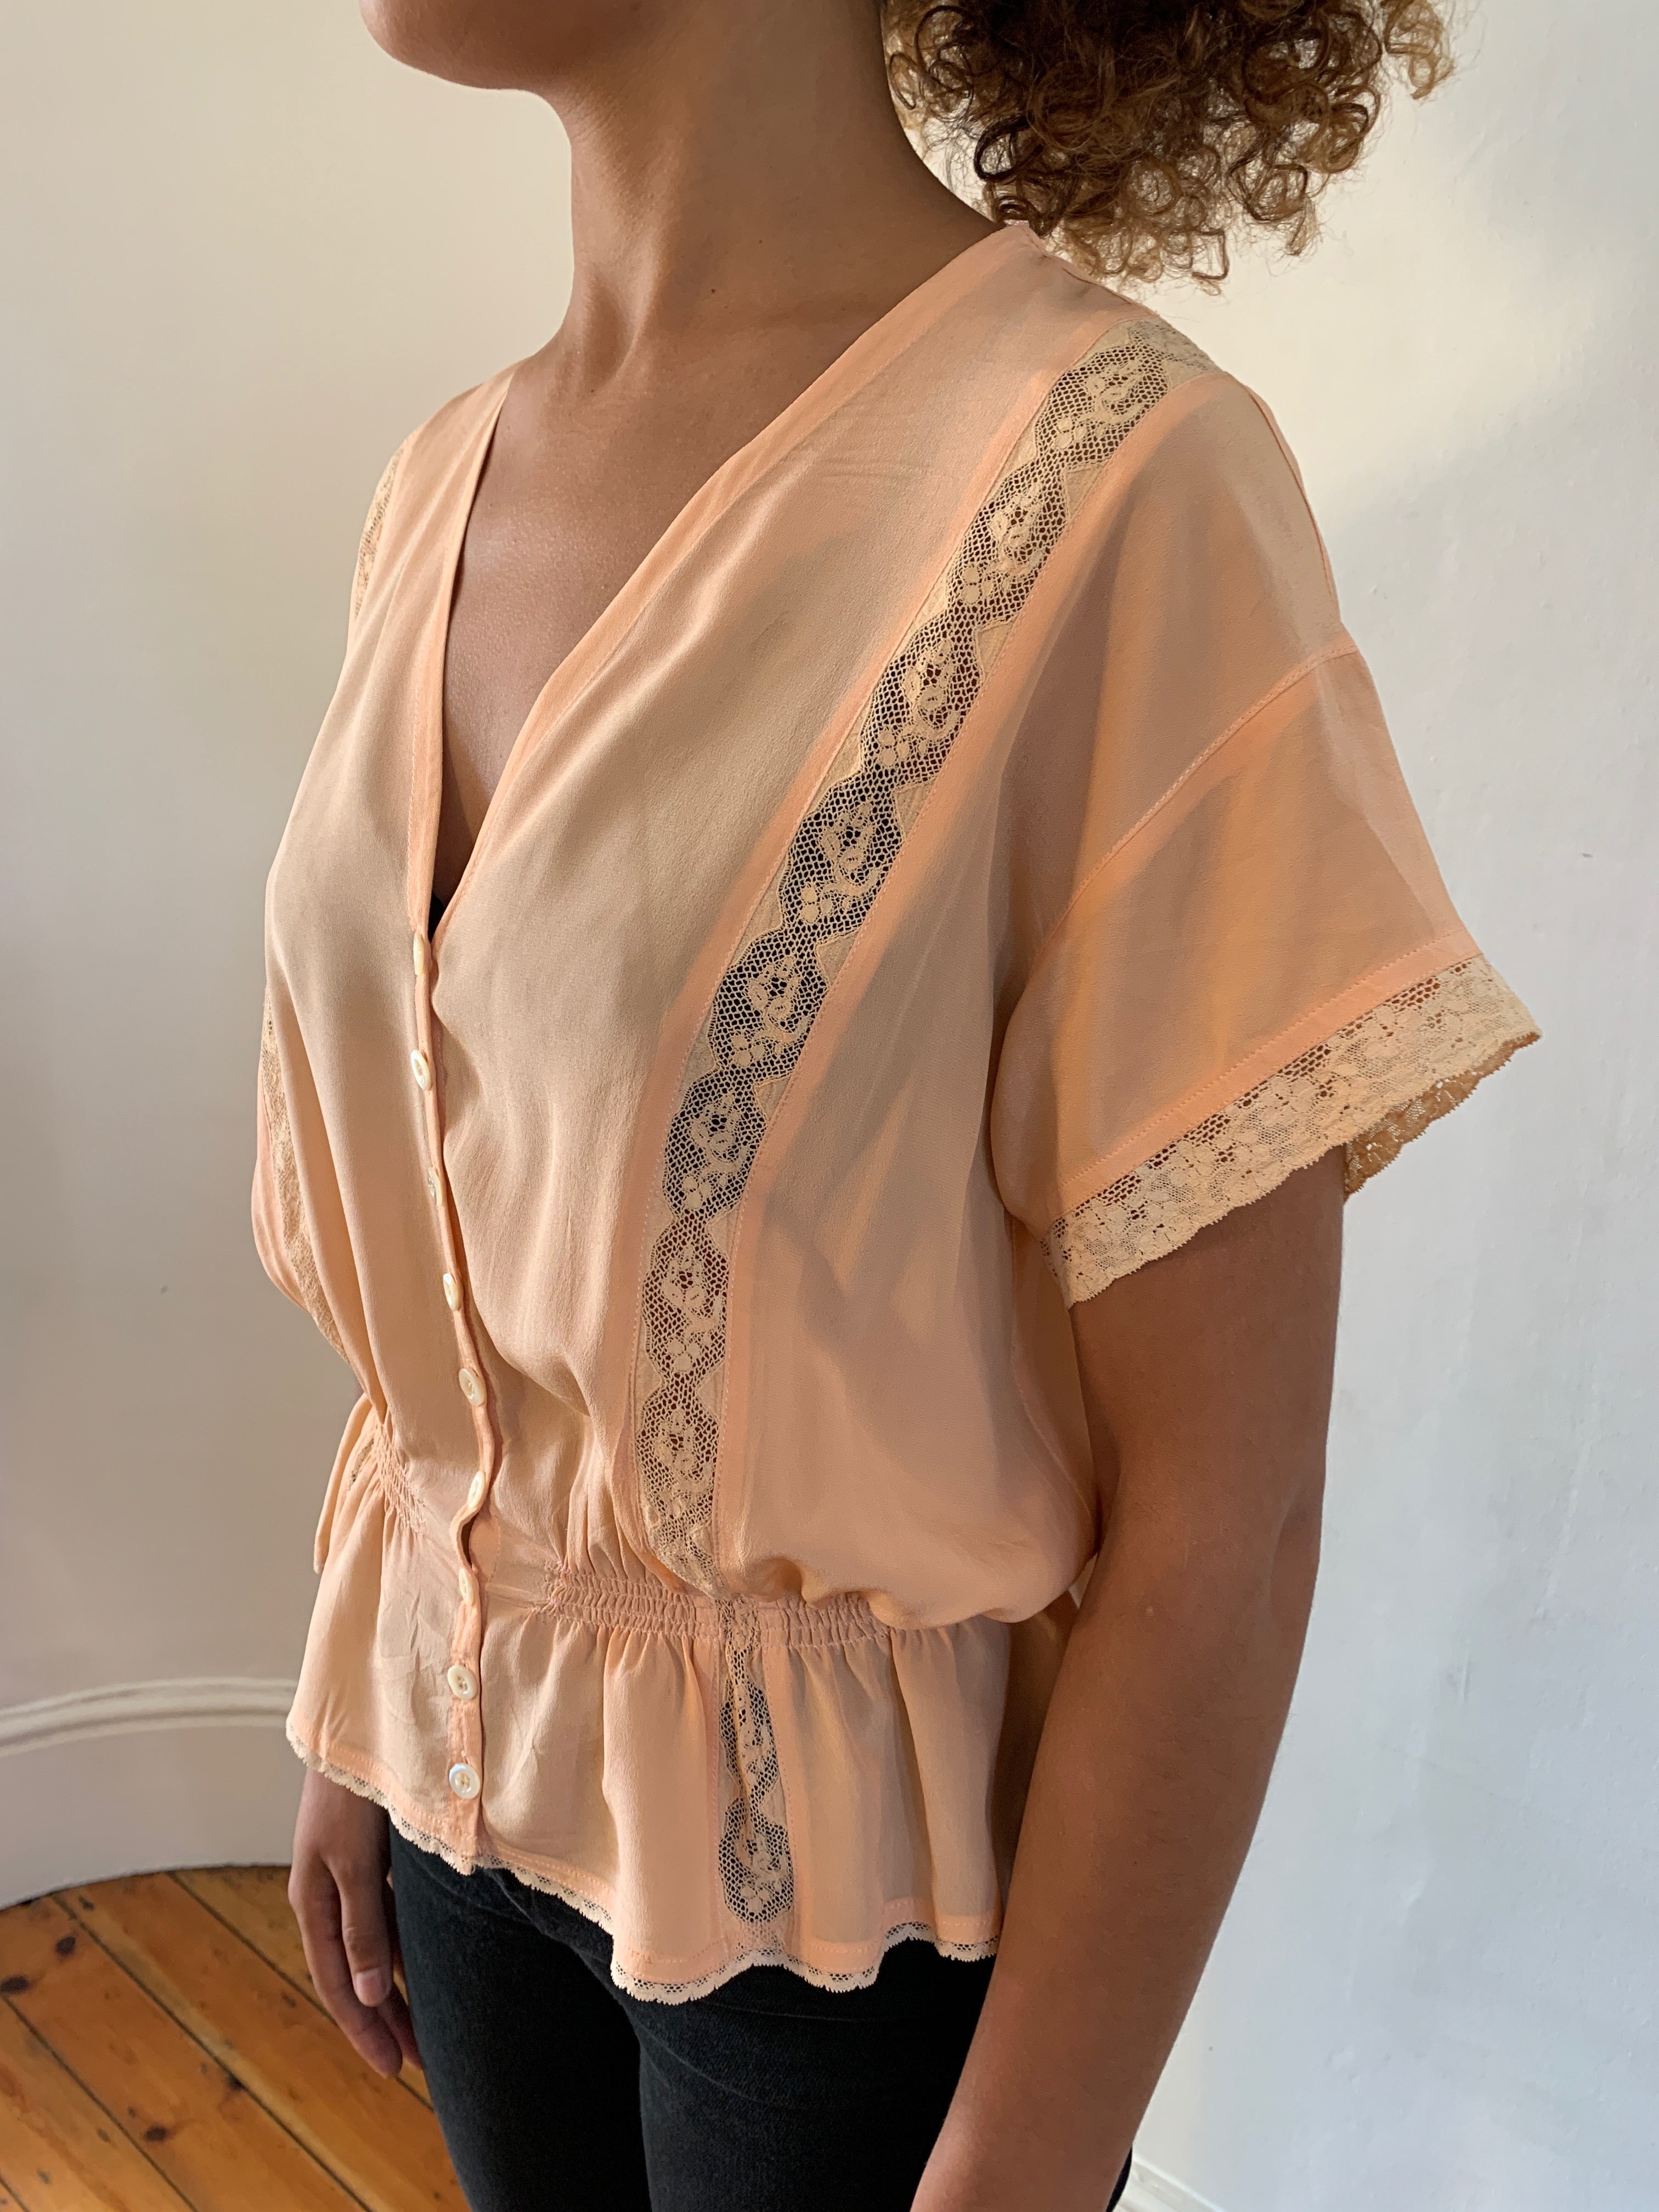 Complice silk and lace lingerie style 1970's blouse